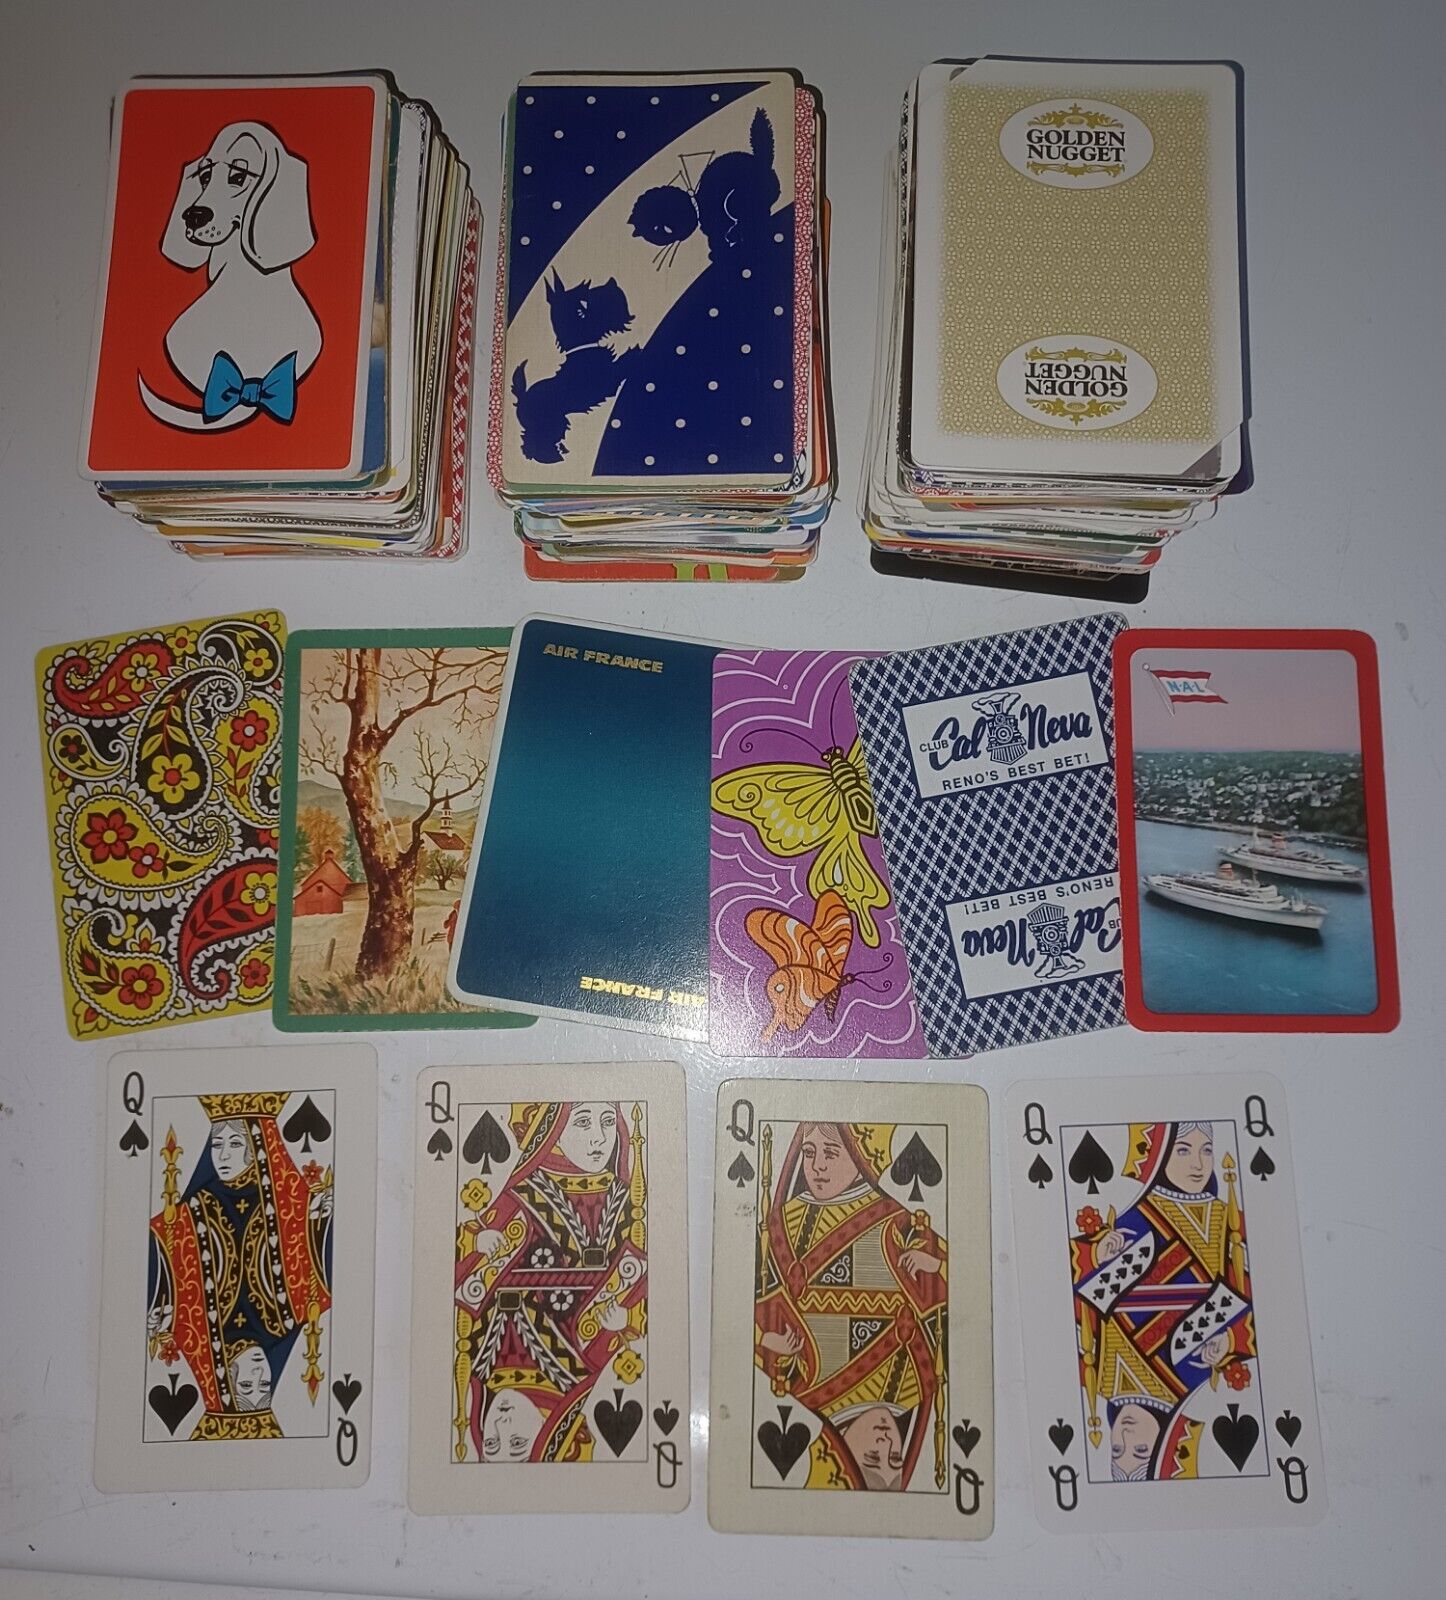 LOT of 436 Single Swap Playing Cards; All Queen of Spades, No Doubles, Rare....